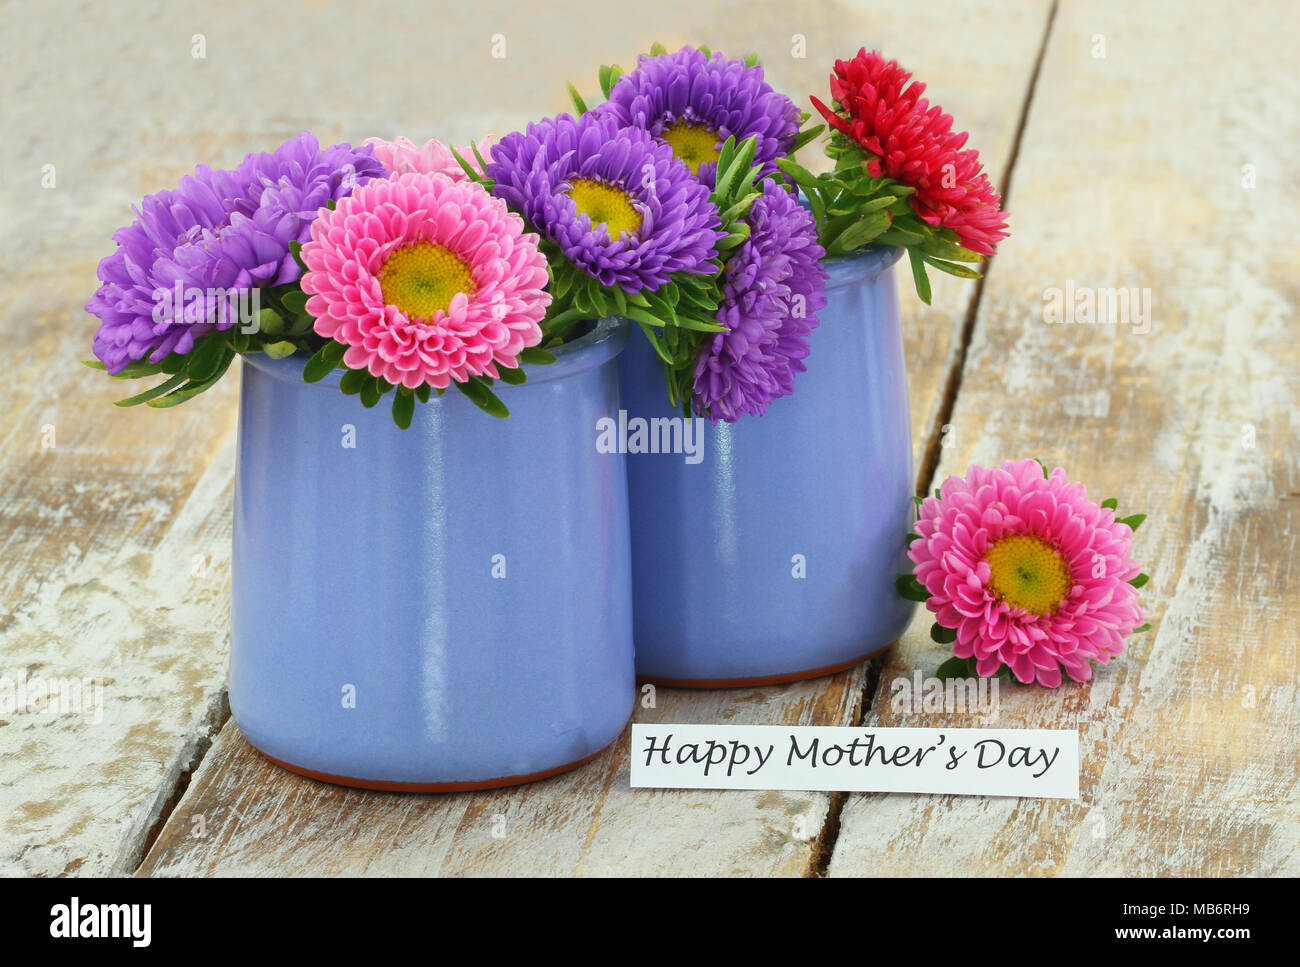 Happy Mother's day card with colorful daisies Stock Photo